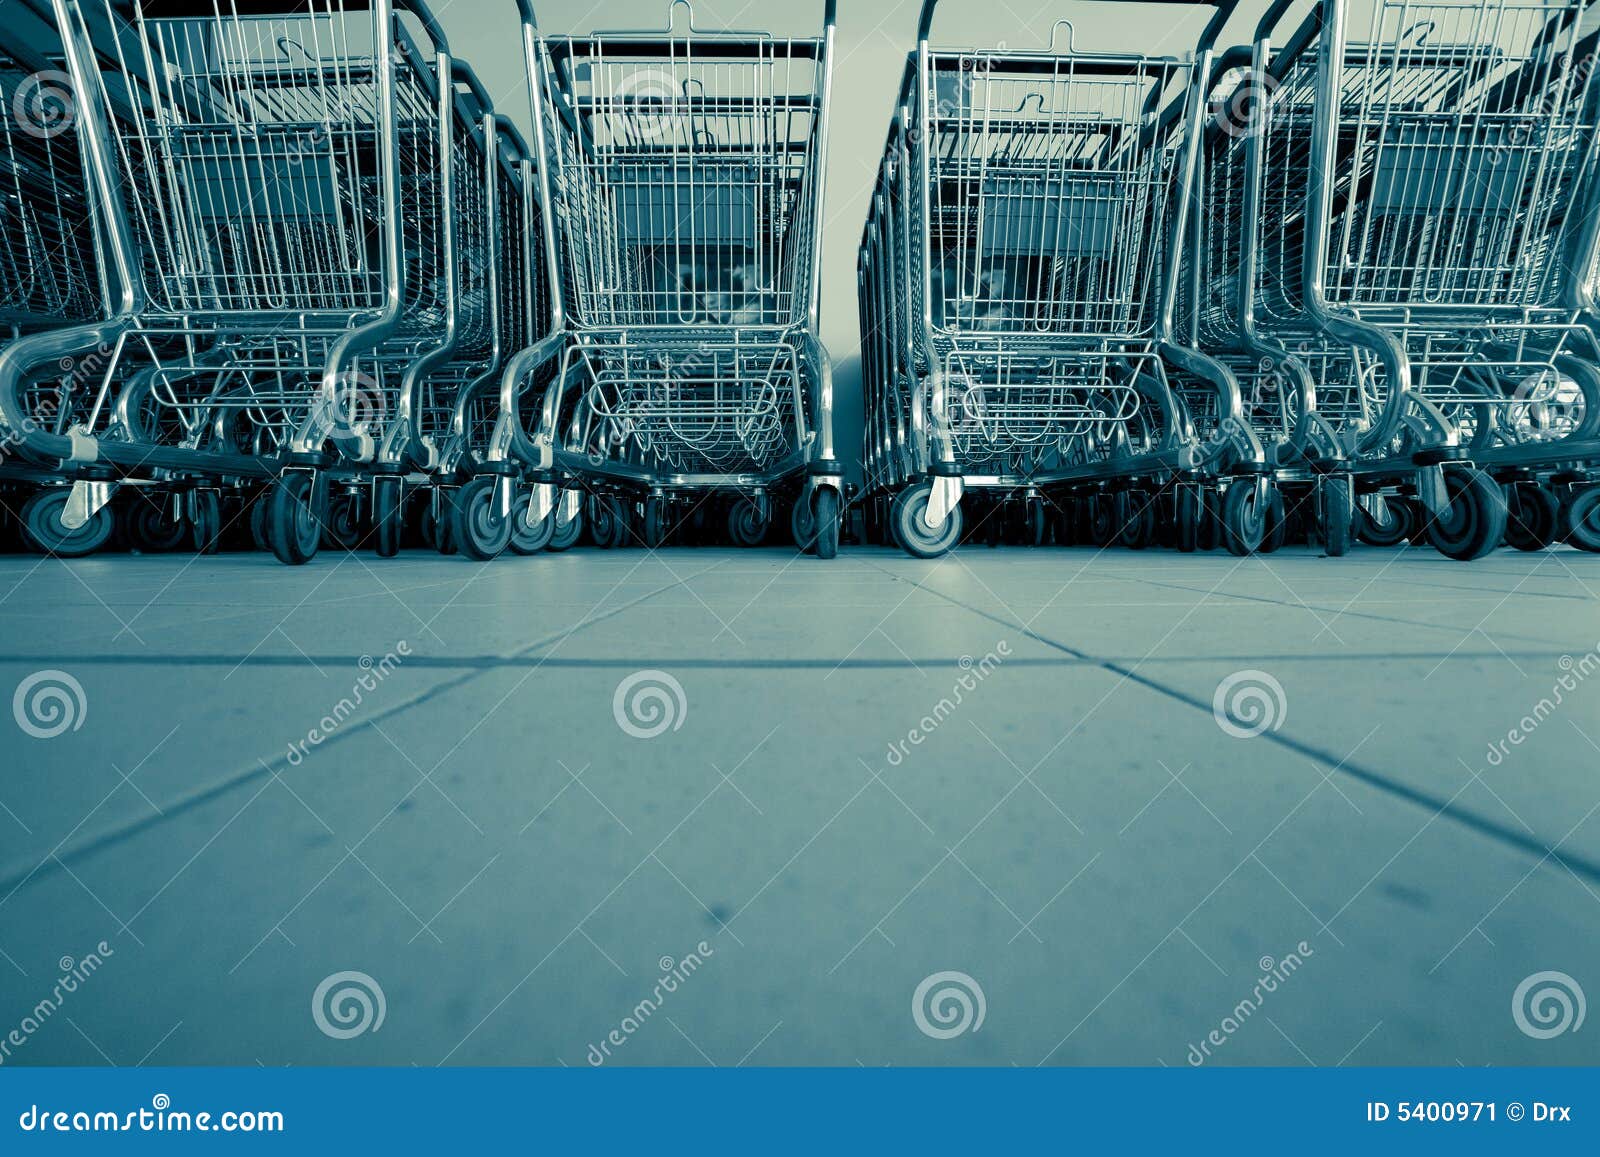 shopping carts in supermarket